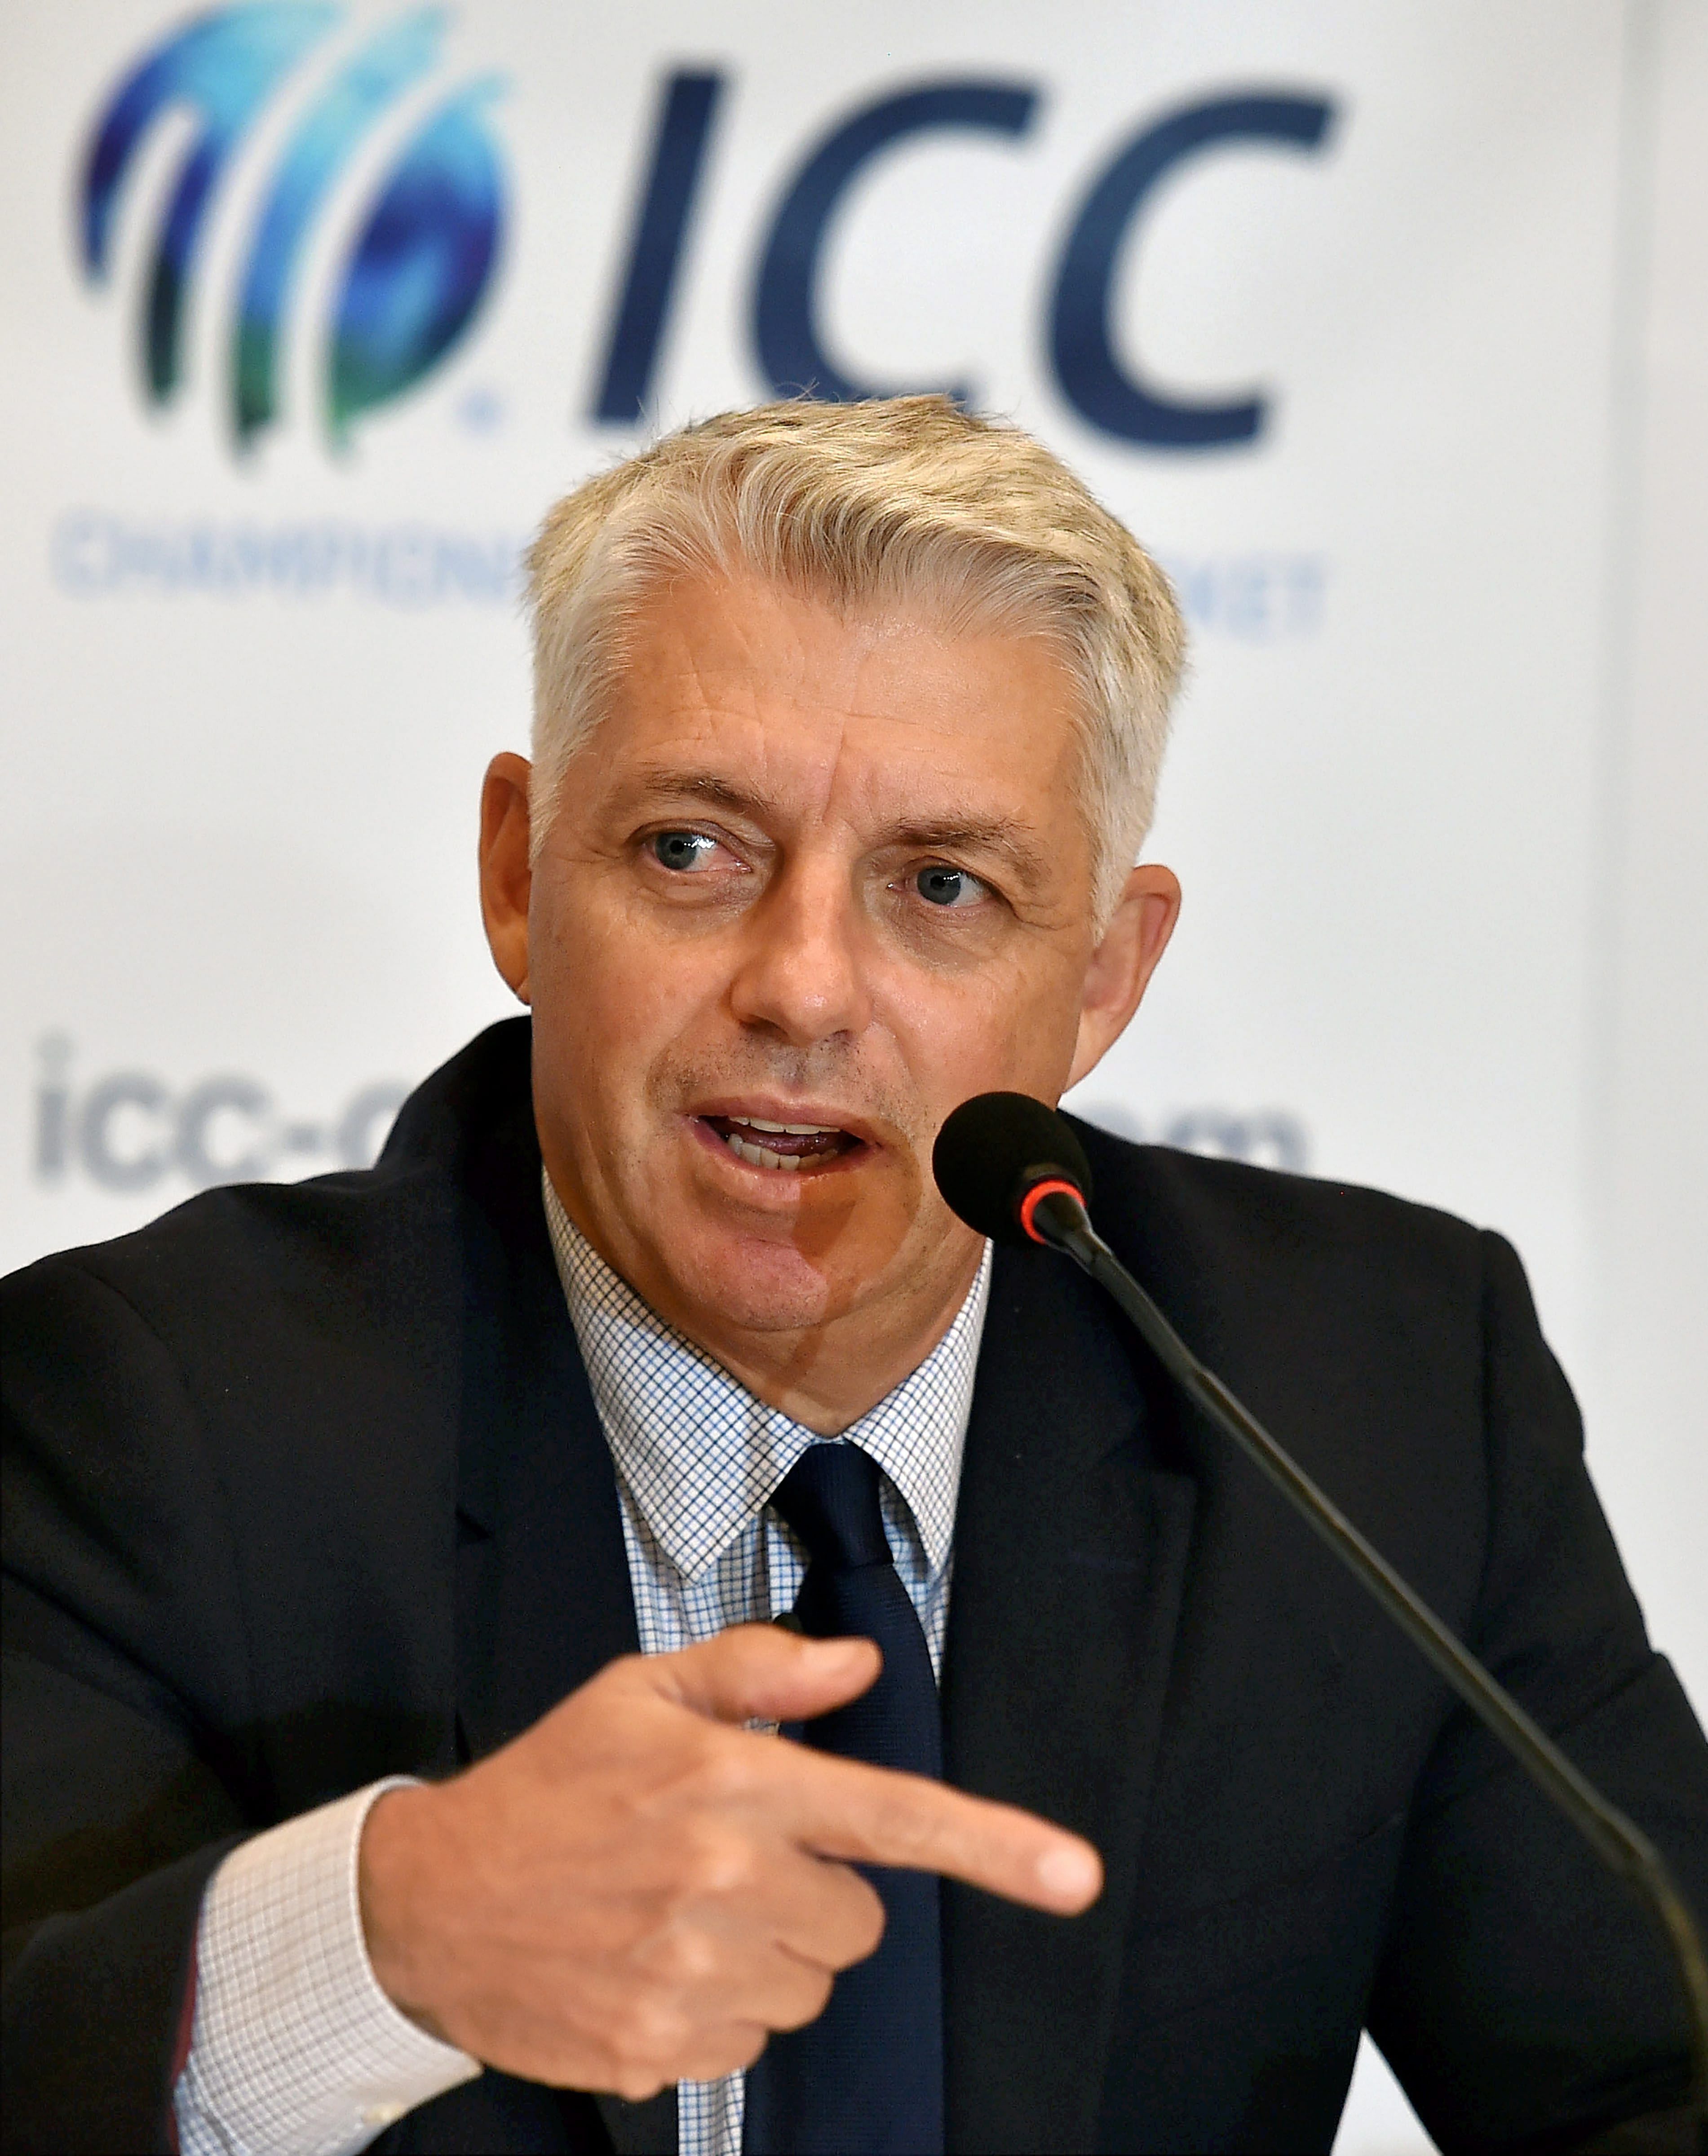 ICC Chief Executive David Richardson speaks during a media interaction after ICC Board meeting in Kolkata. (PTI Photo)